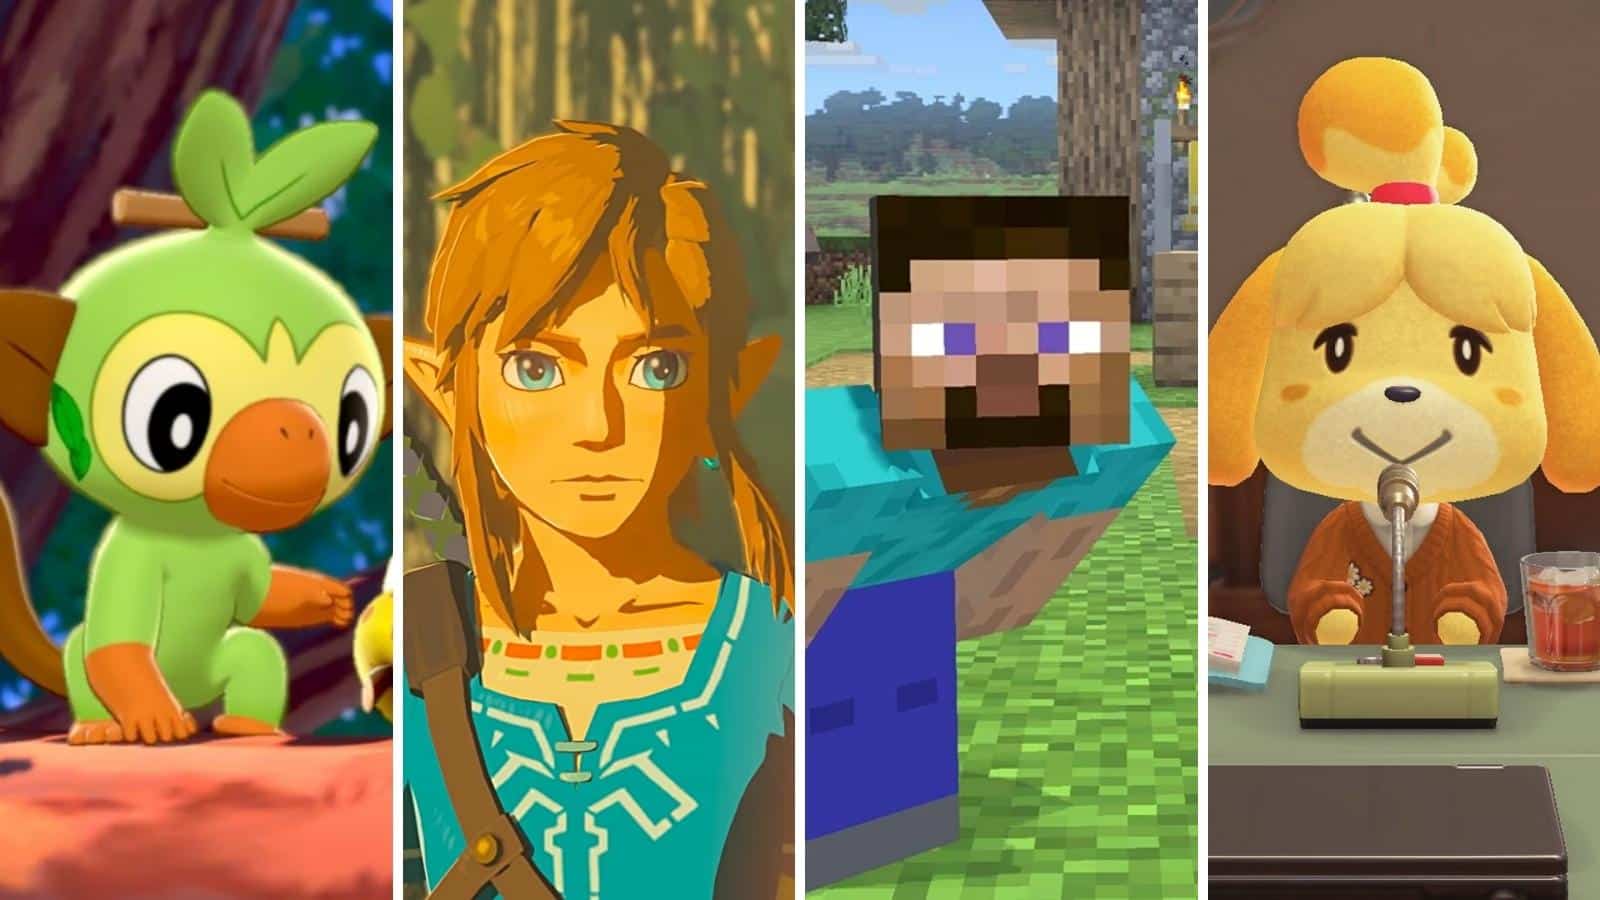 Metacritic Shared The Best Nintendo Switch Games of 2021 